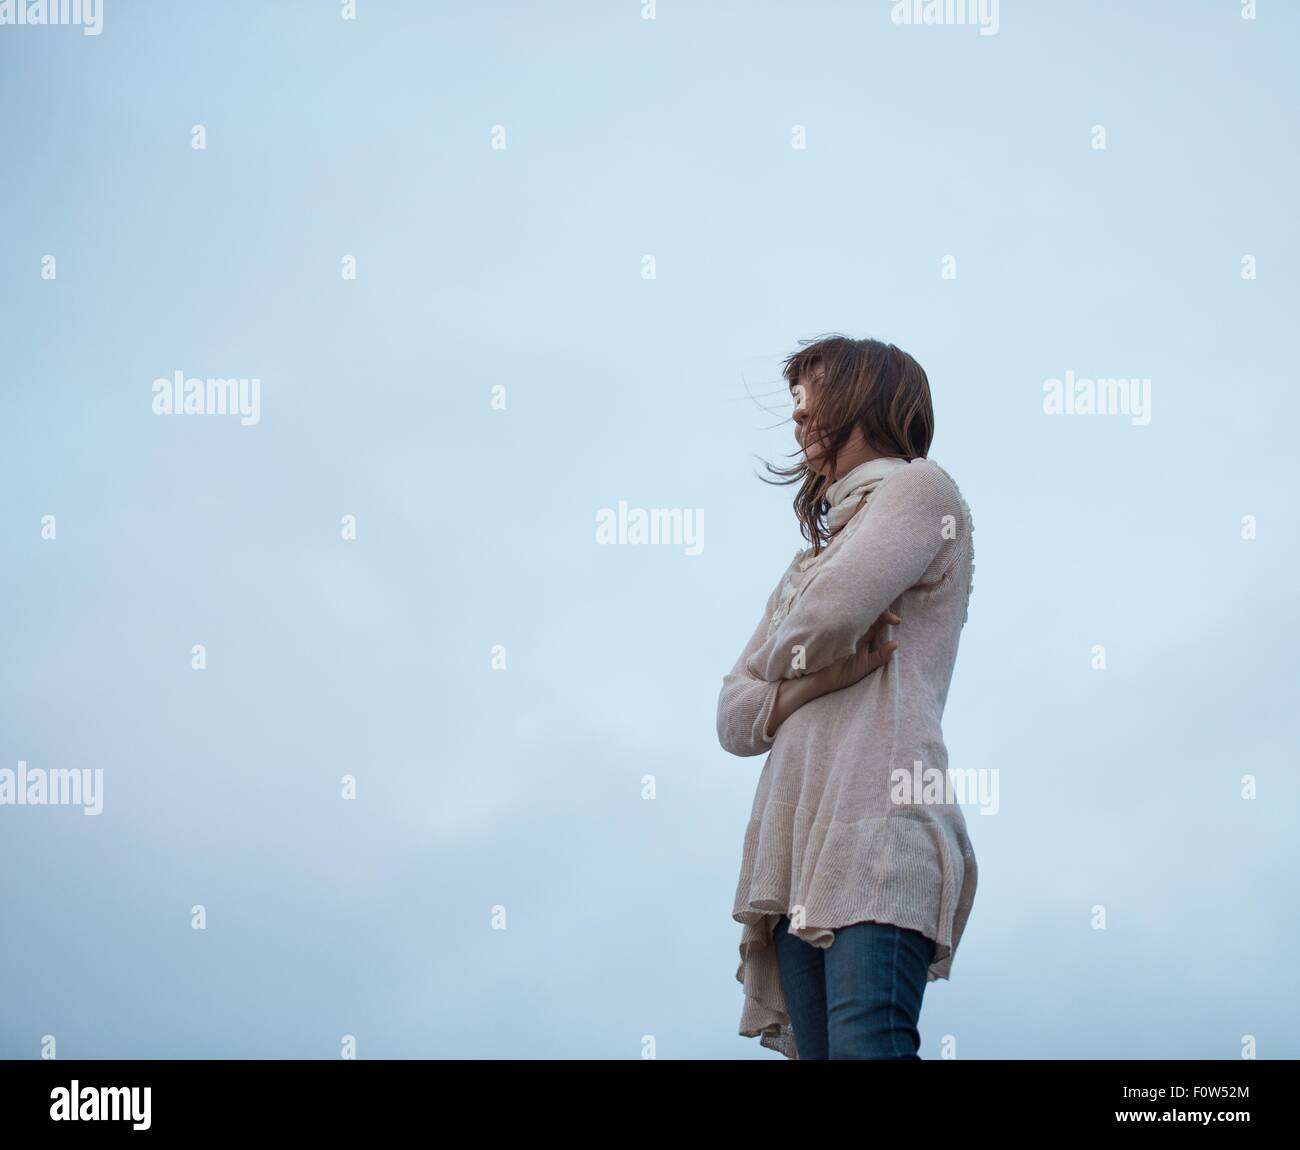 Low angle view of woman with arms folded and overcast sky Stock Photo